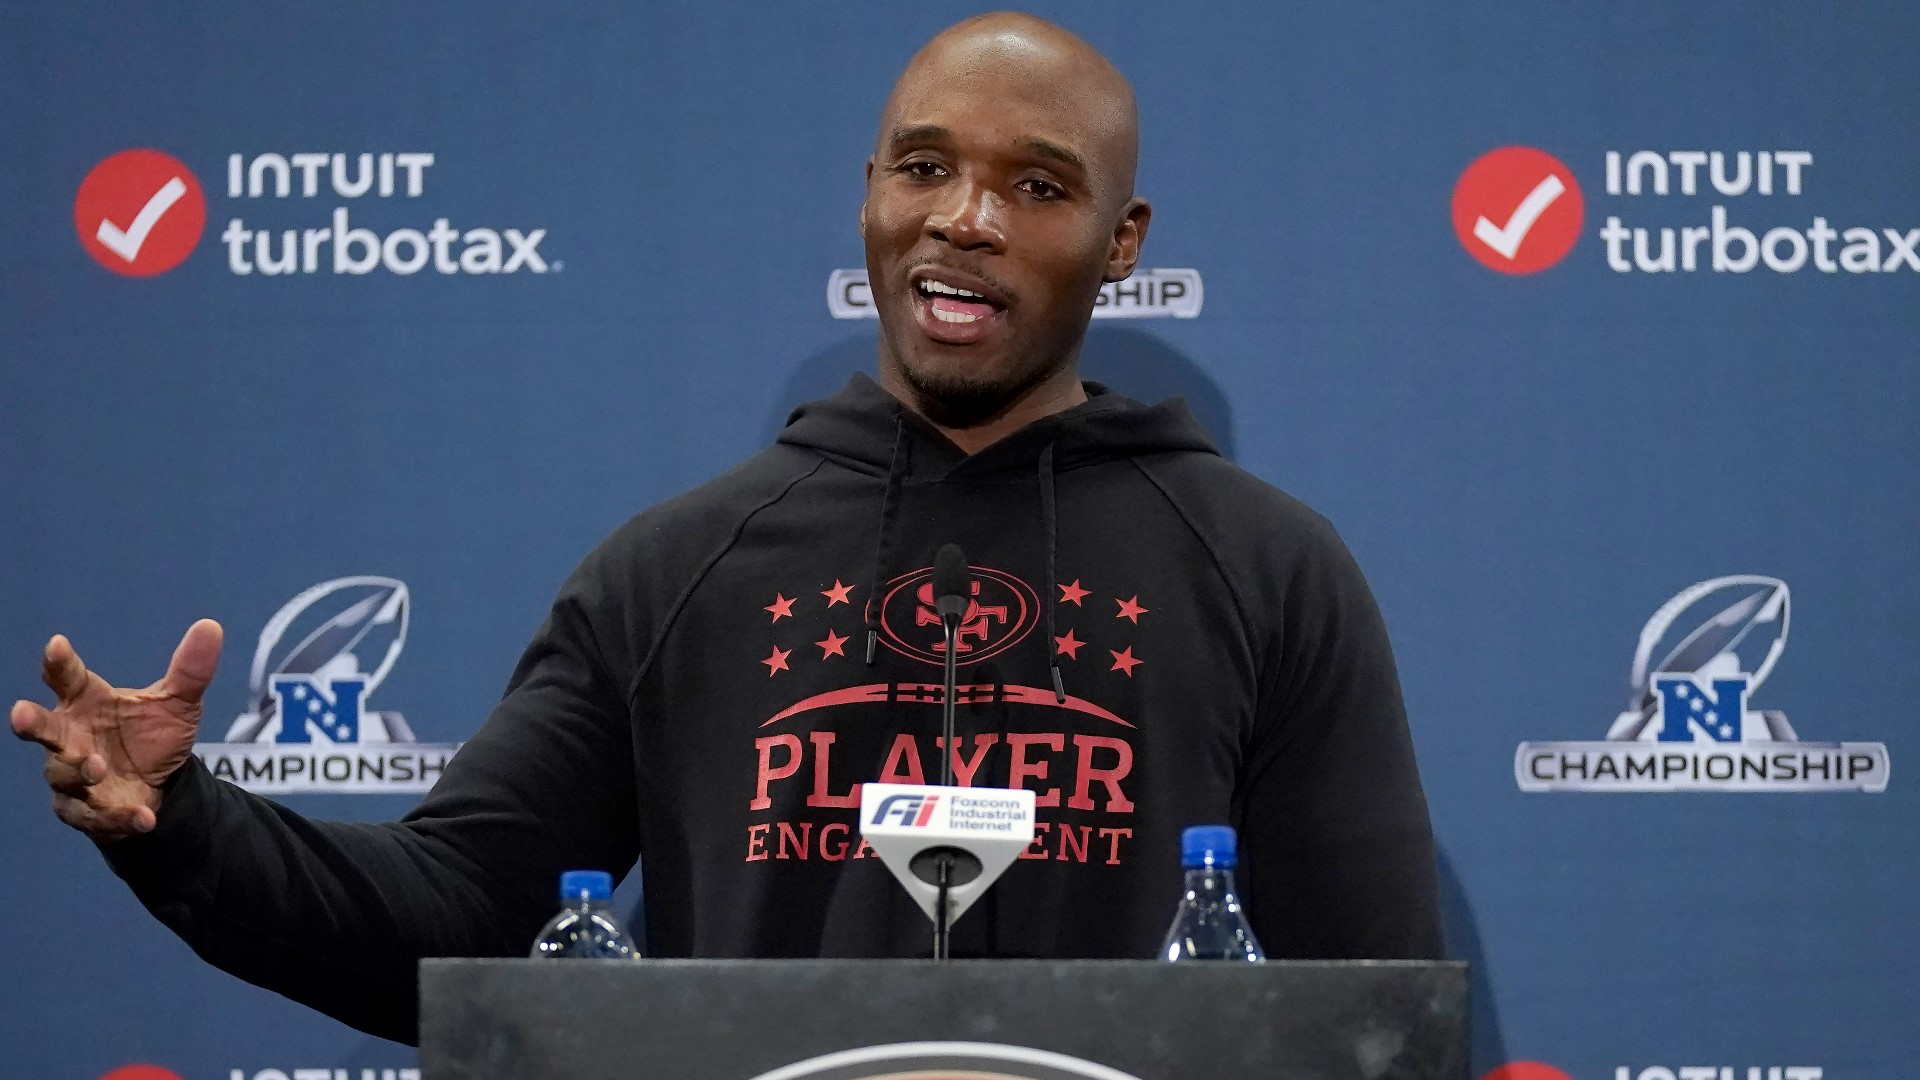 Former Texans linebacker and last year's San Francisco 49ers defensive coordinator DeMeco Ryans was officially made the franchise's sixth head coach on Wednesday.